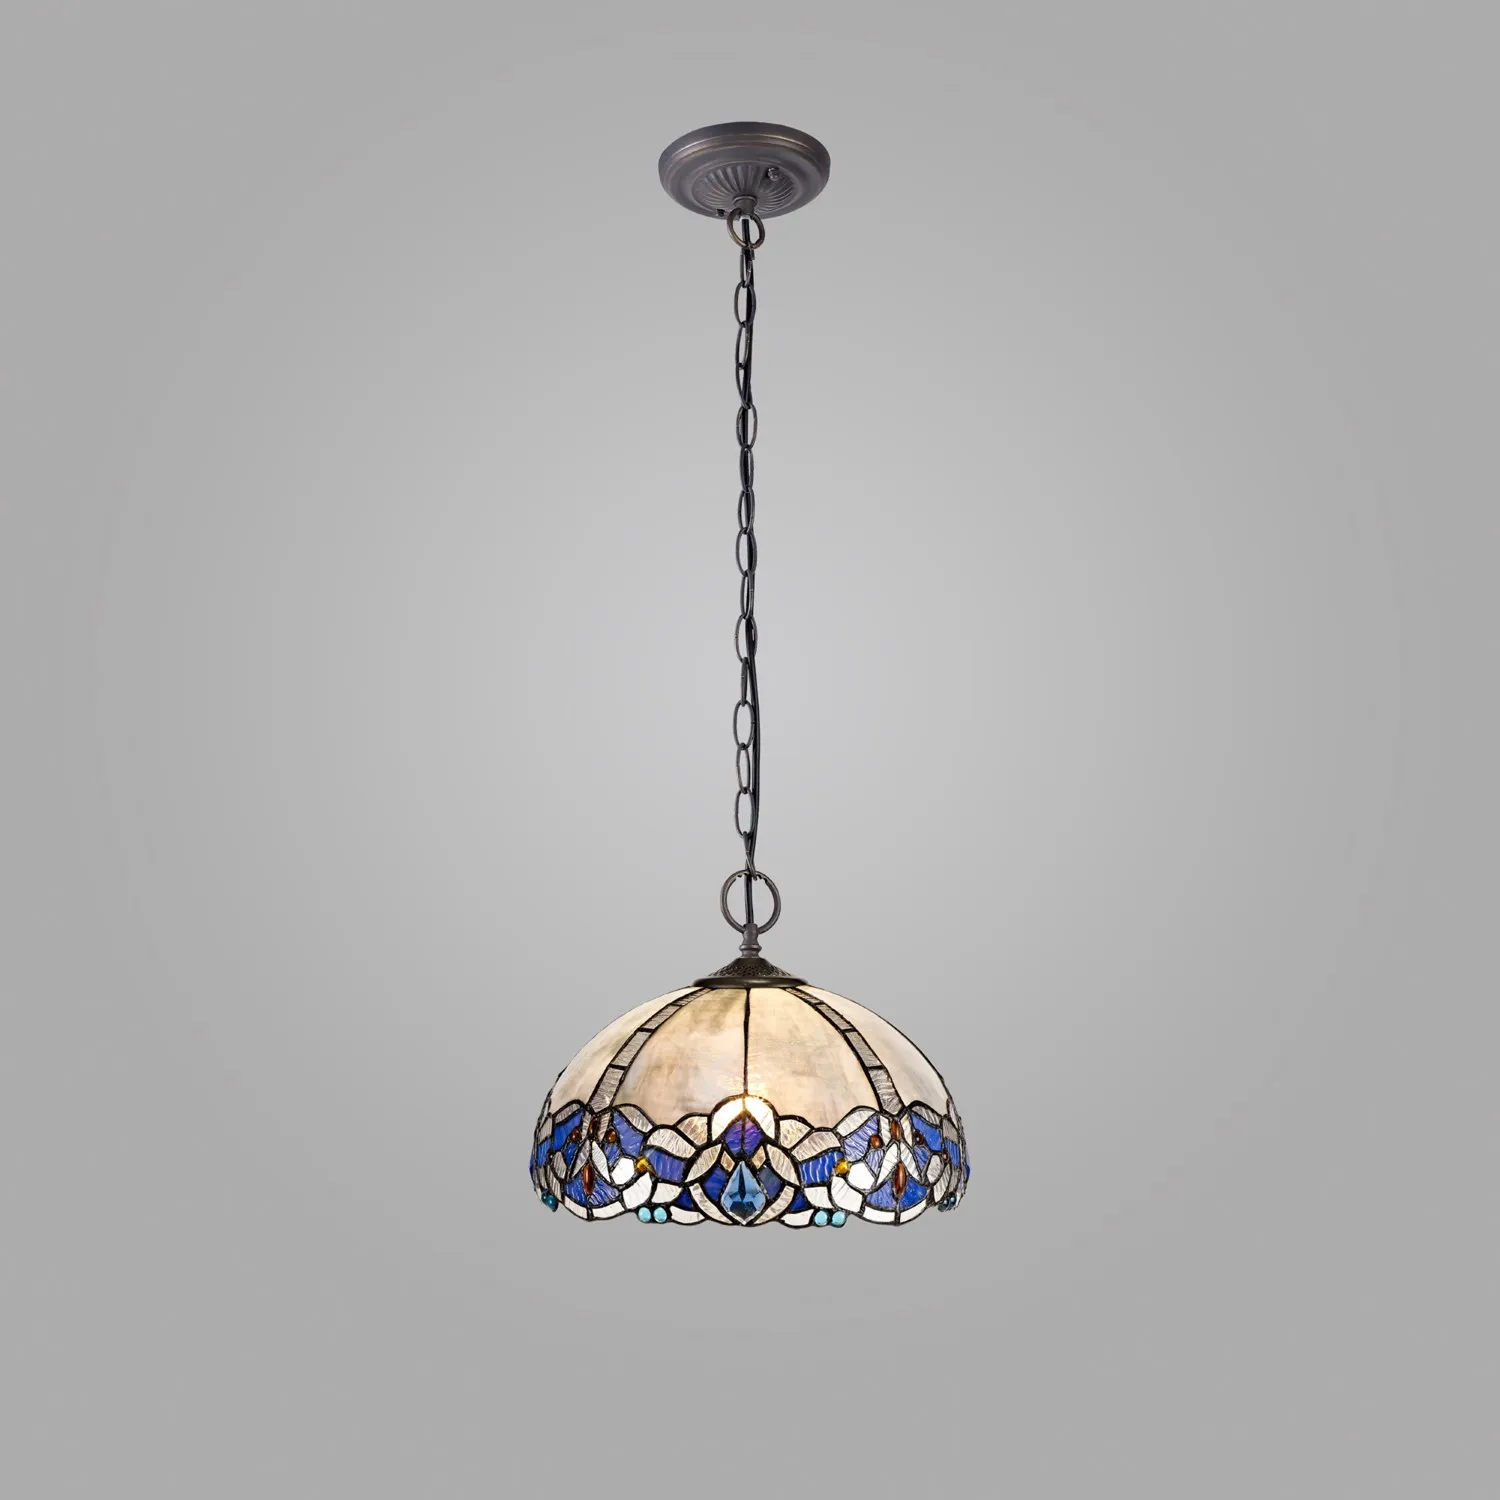 Ardingly 2 Light Downlight Pendant E27 With 30cm Tiffany Shade, Blue Clear Crystal Aged Antique Brass